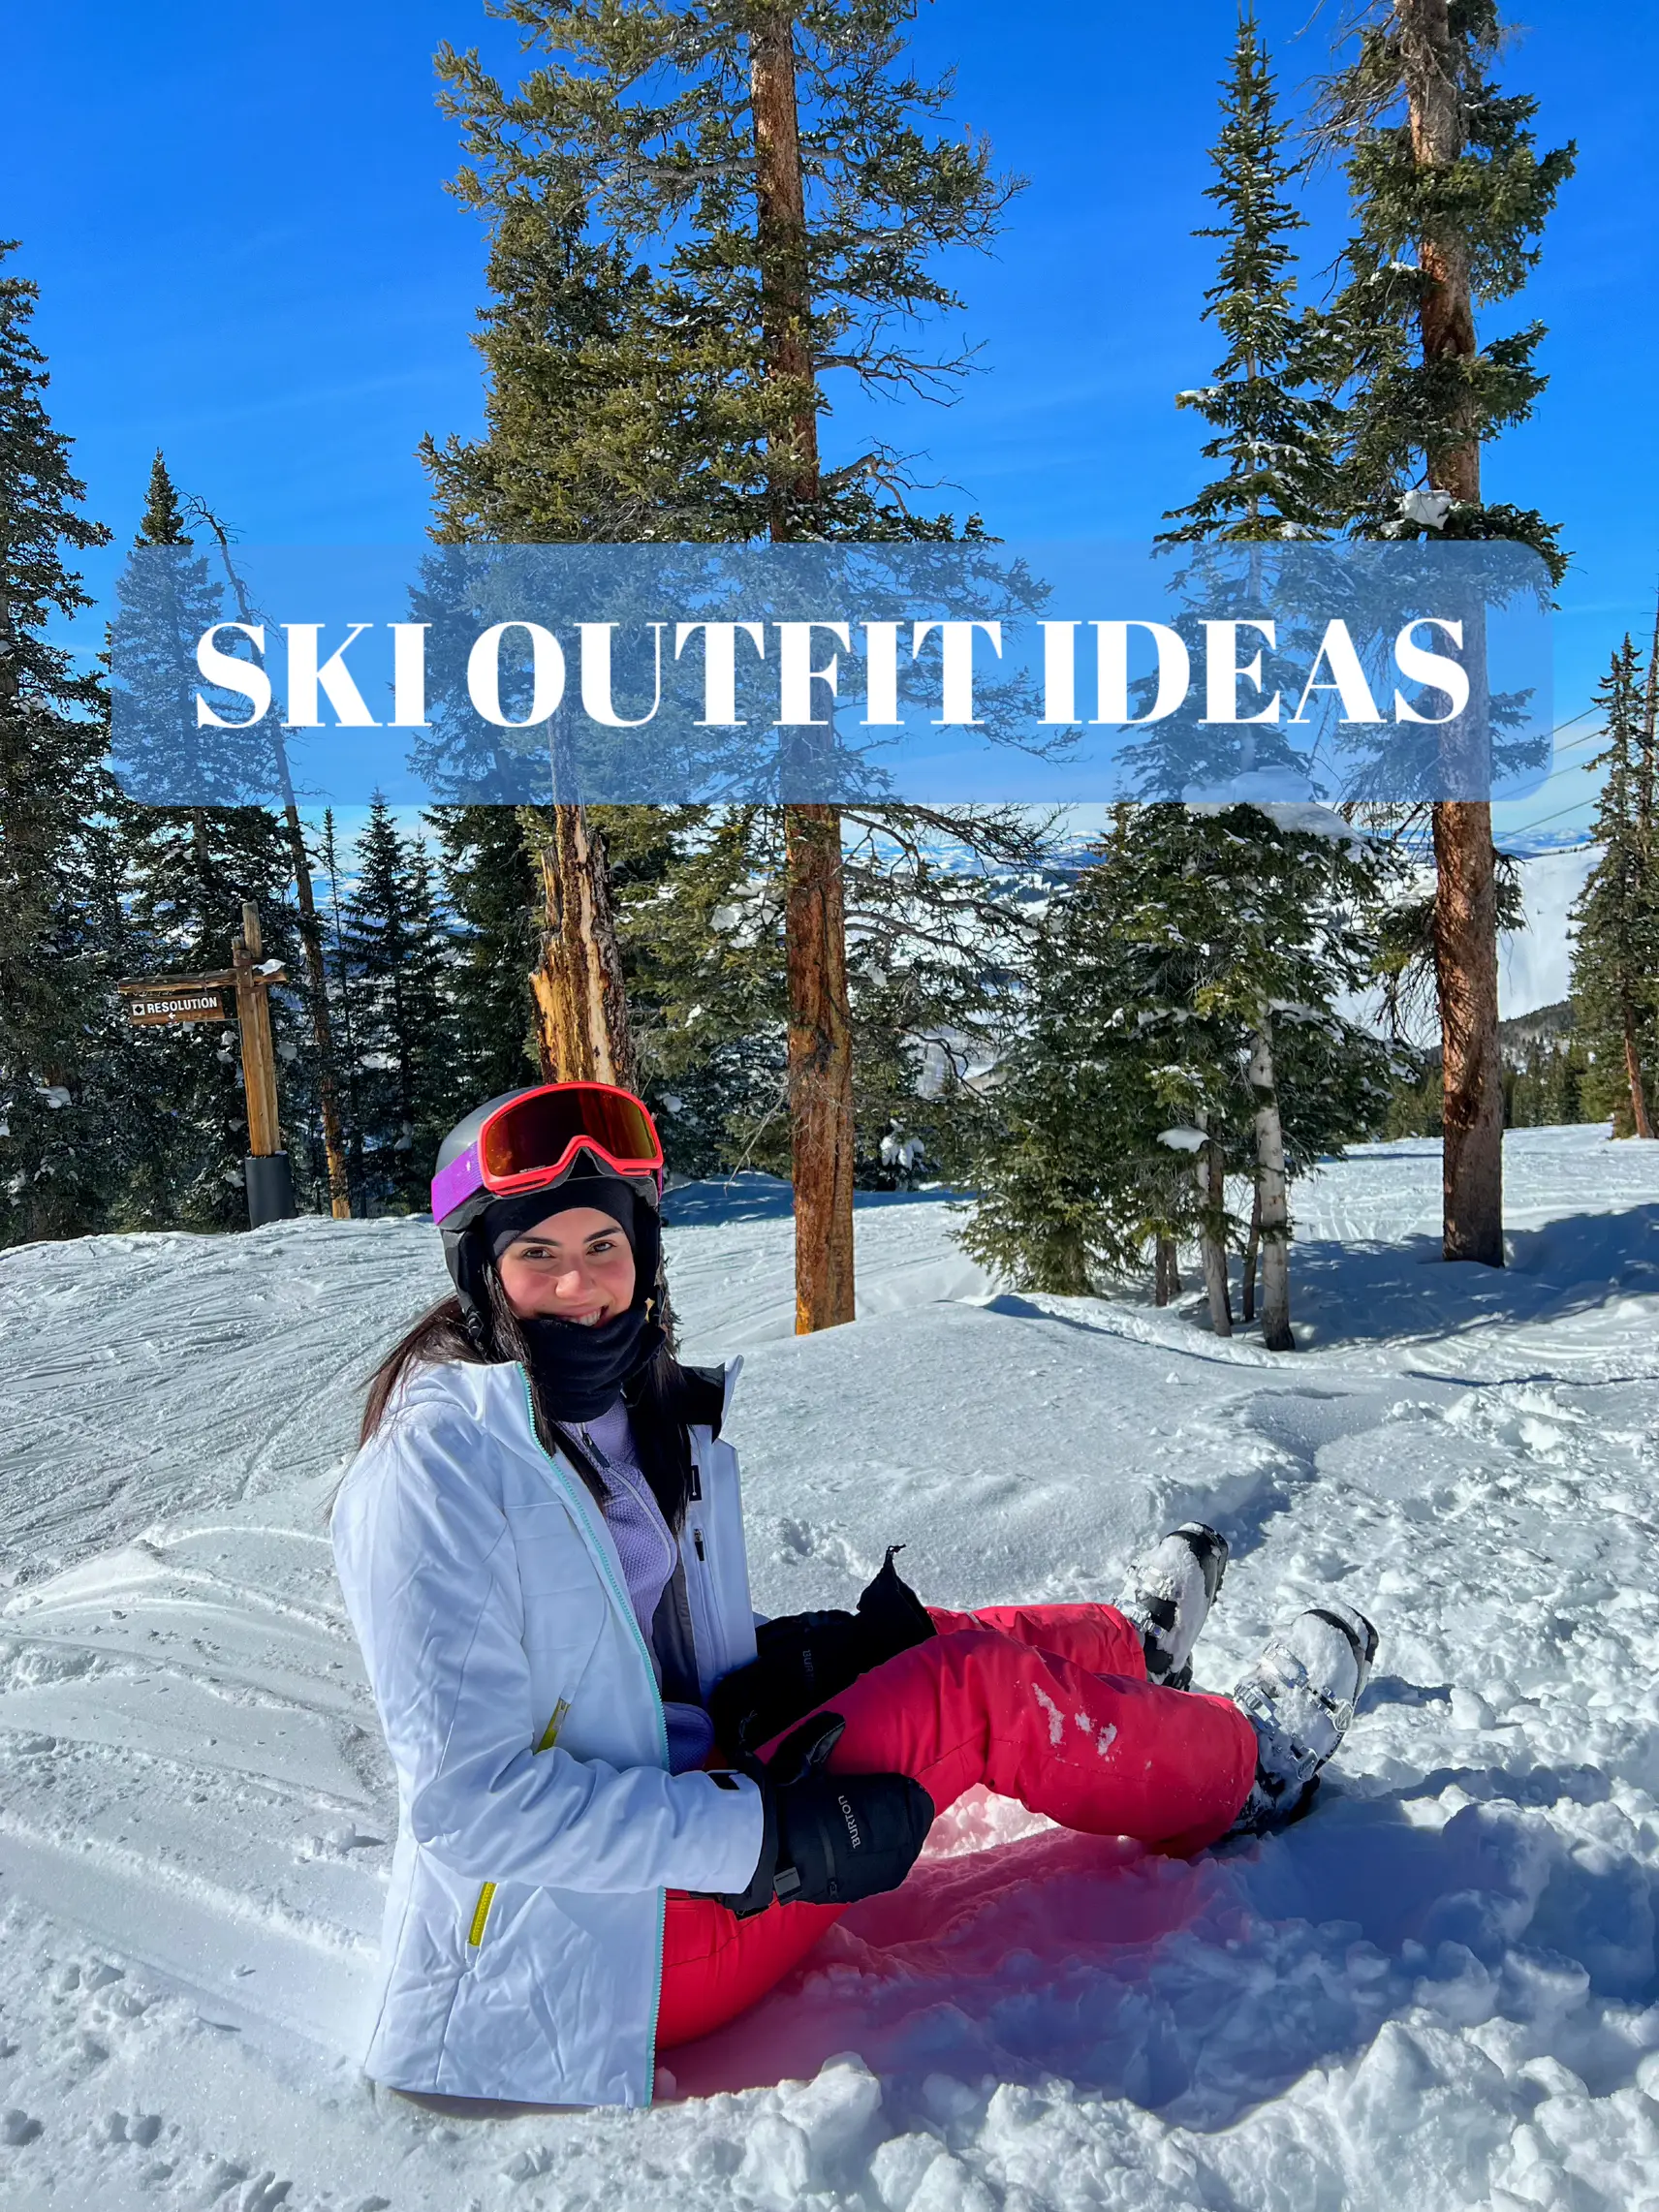 Ski Outfit ideas⛷️, Gallery posted by Larissa